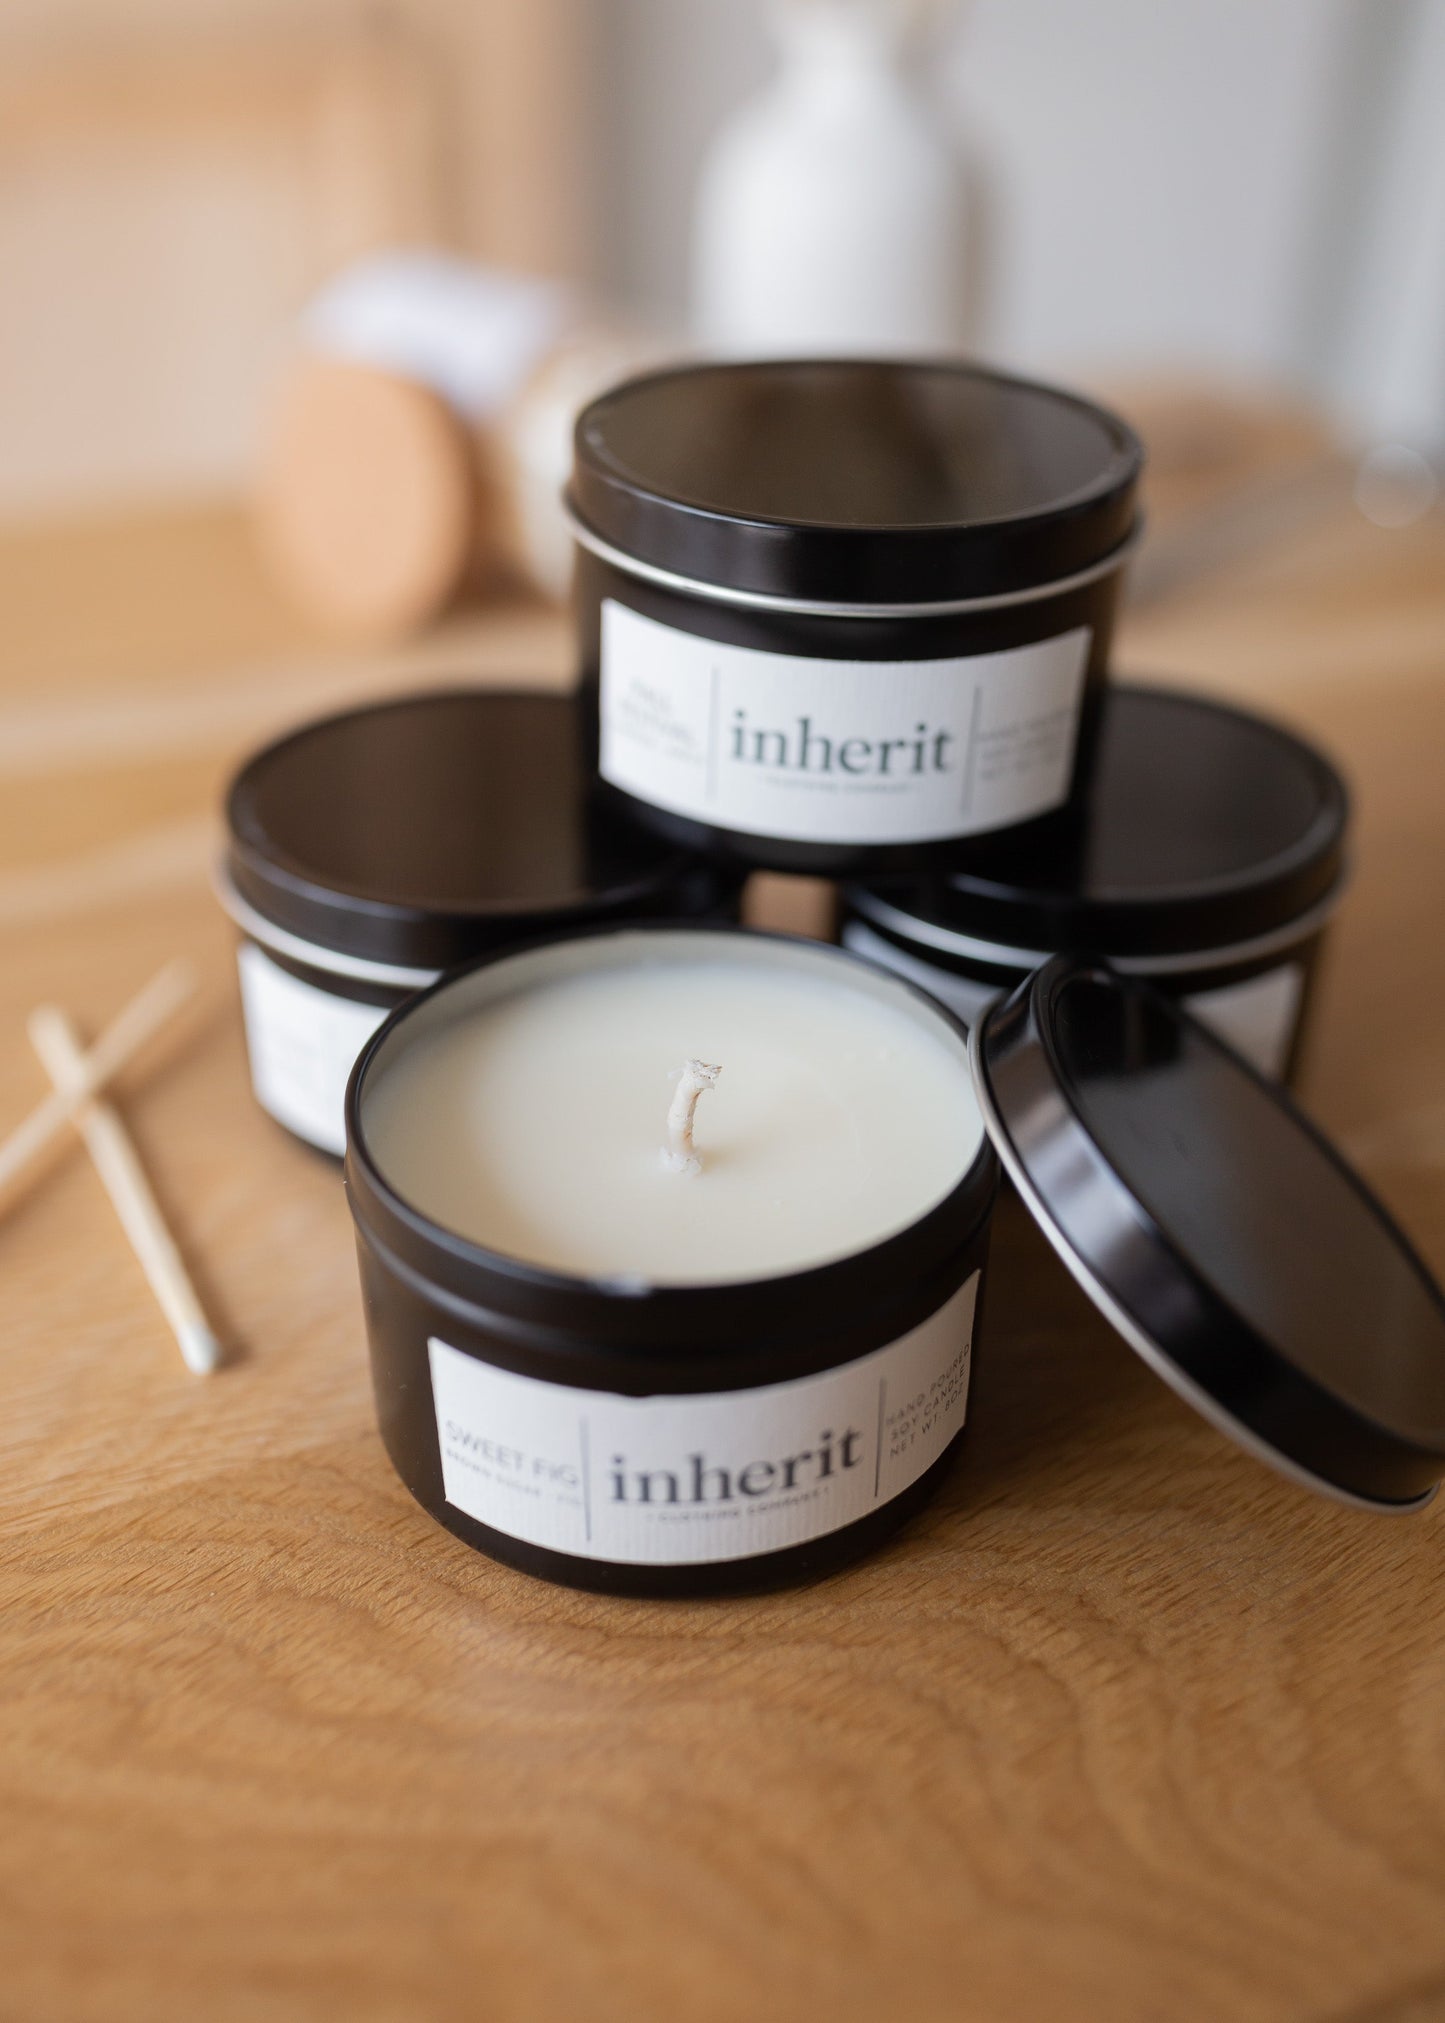 Inherit Fall Scented Soy Candle 8 oz. Gifts